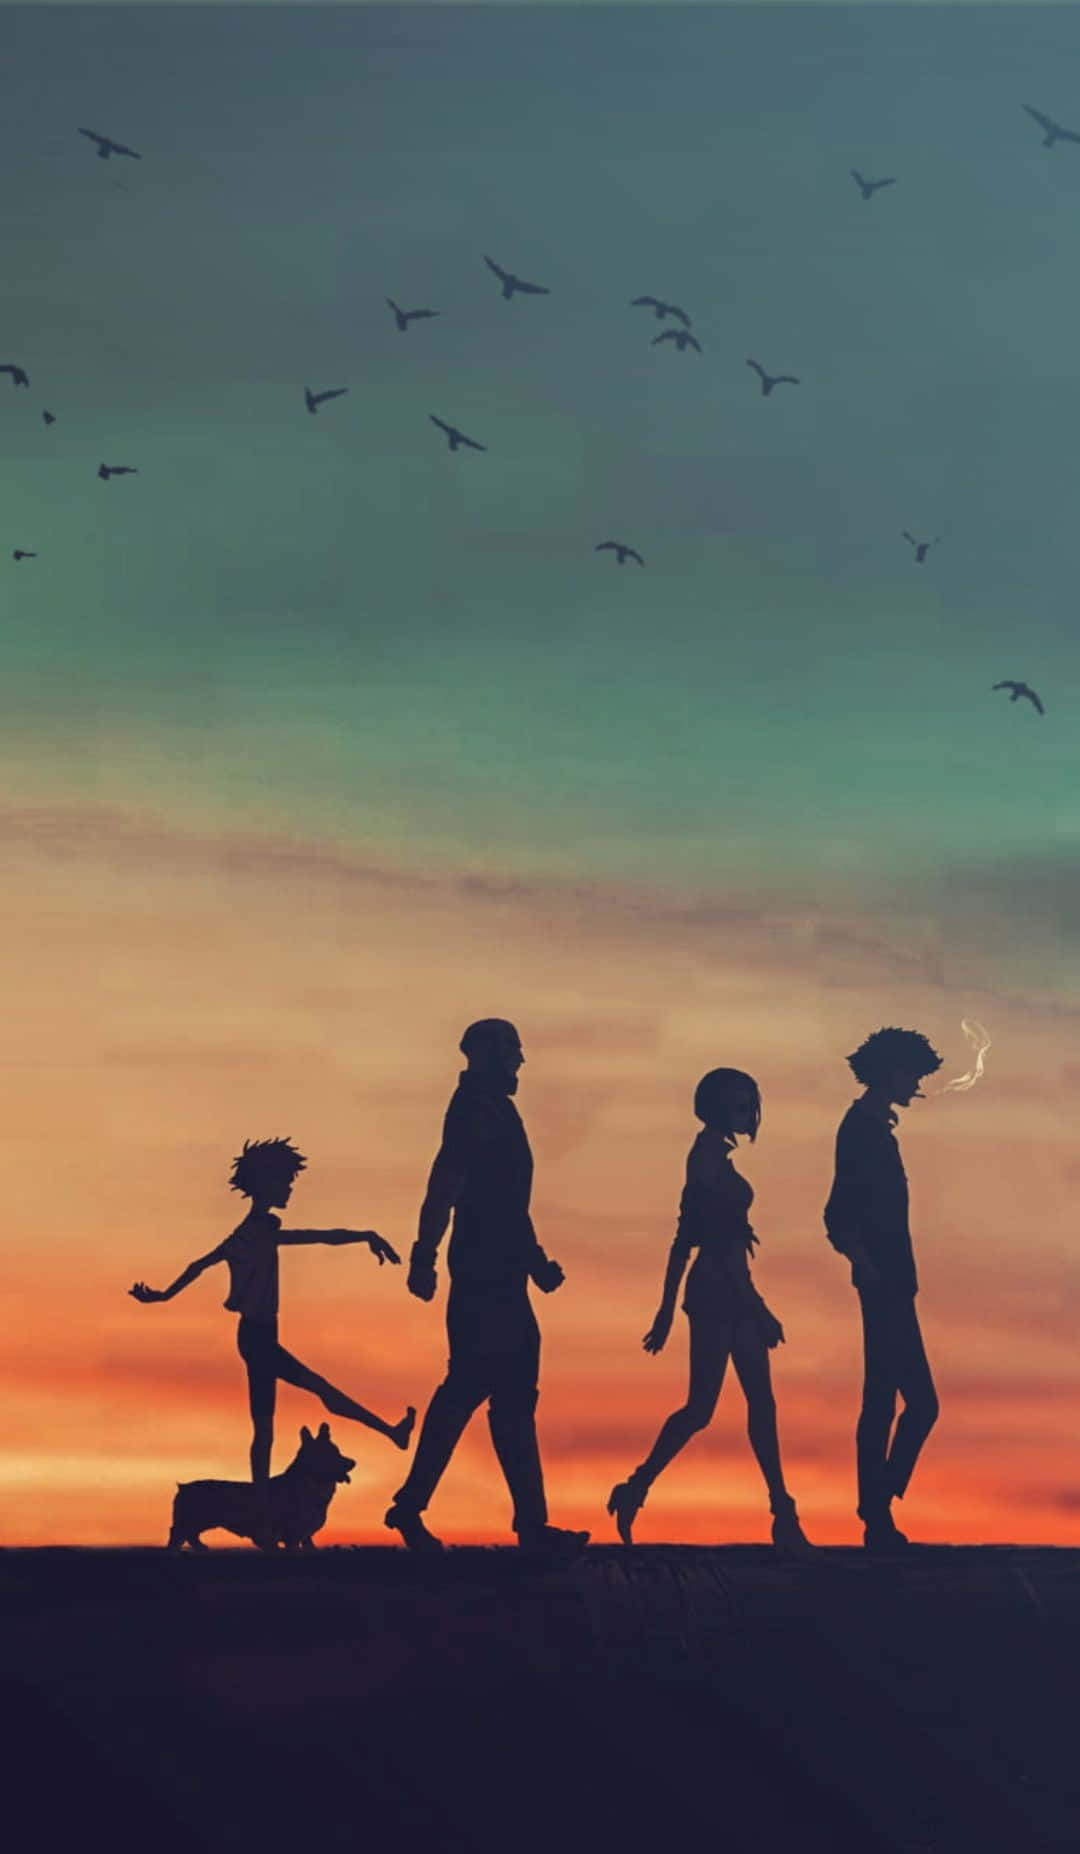 Silhouettes Of People Walking In The Sunset Wallpaper